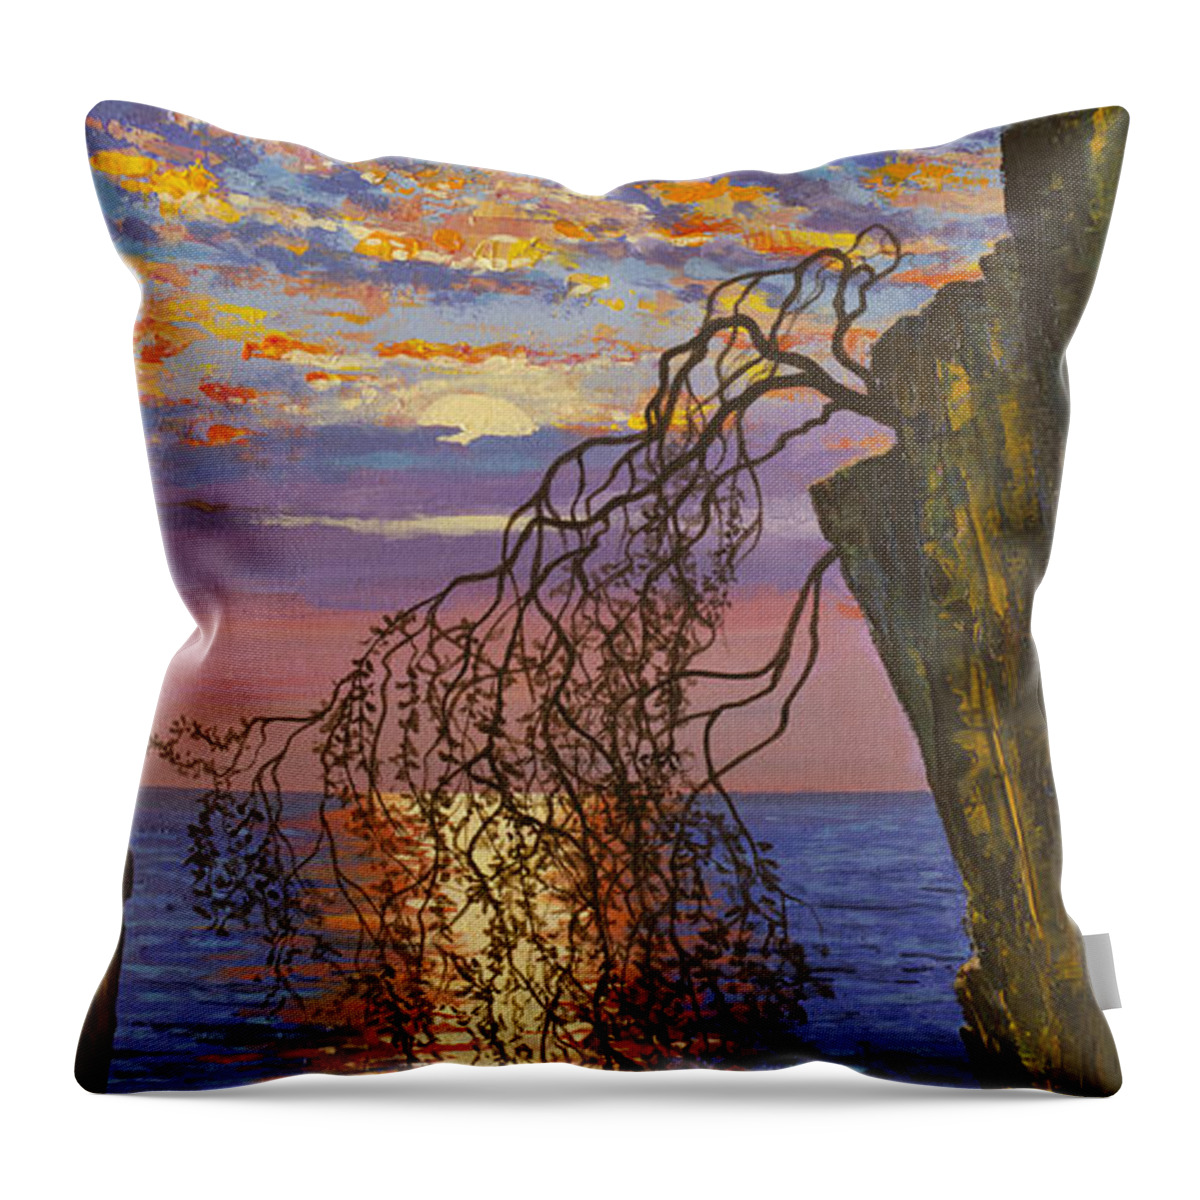 Sunset Throw Pillow featuring the painting Sunset on cliff by Vrindavan Das